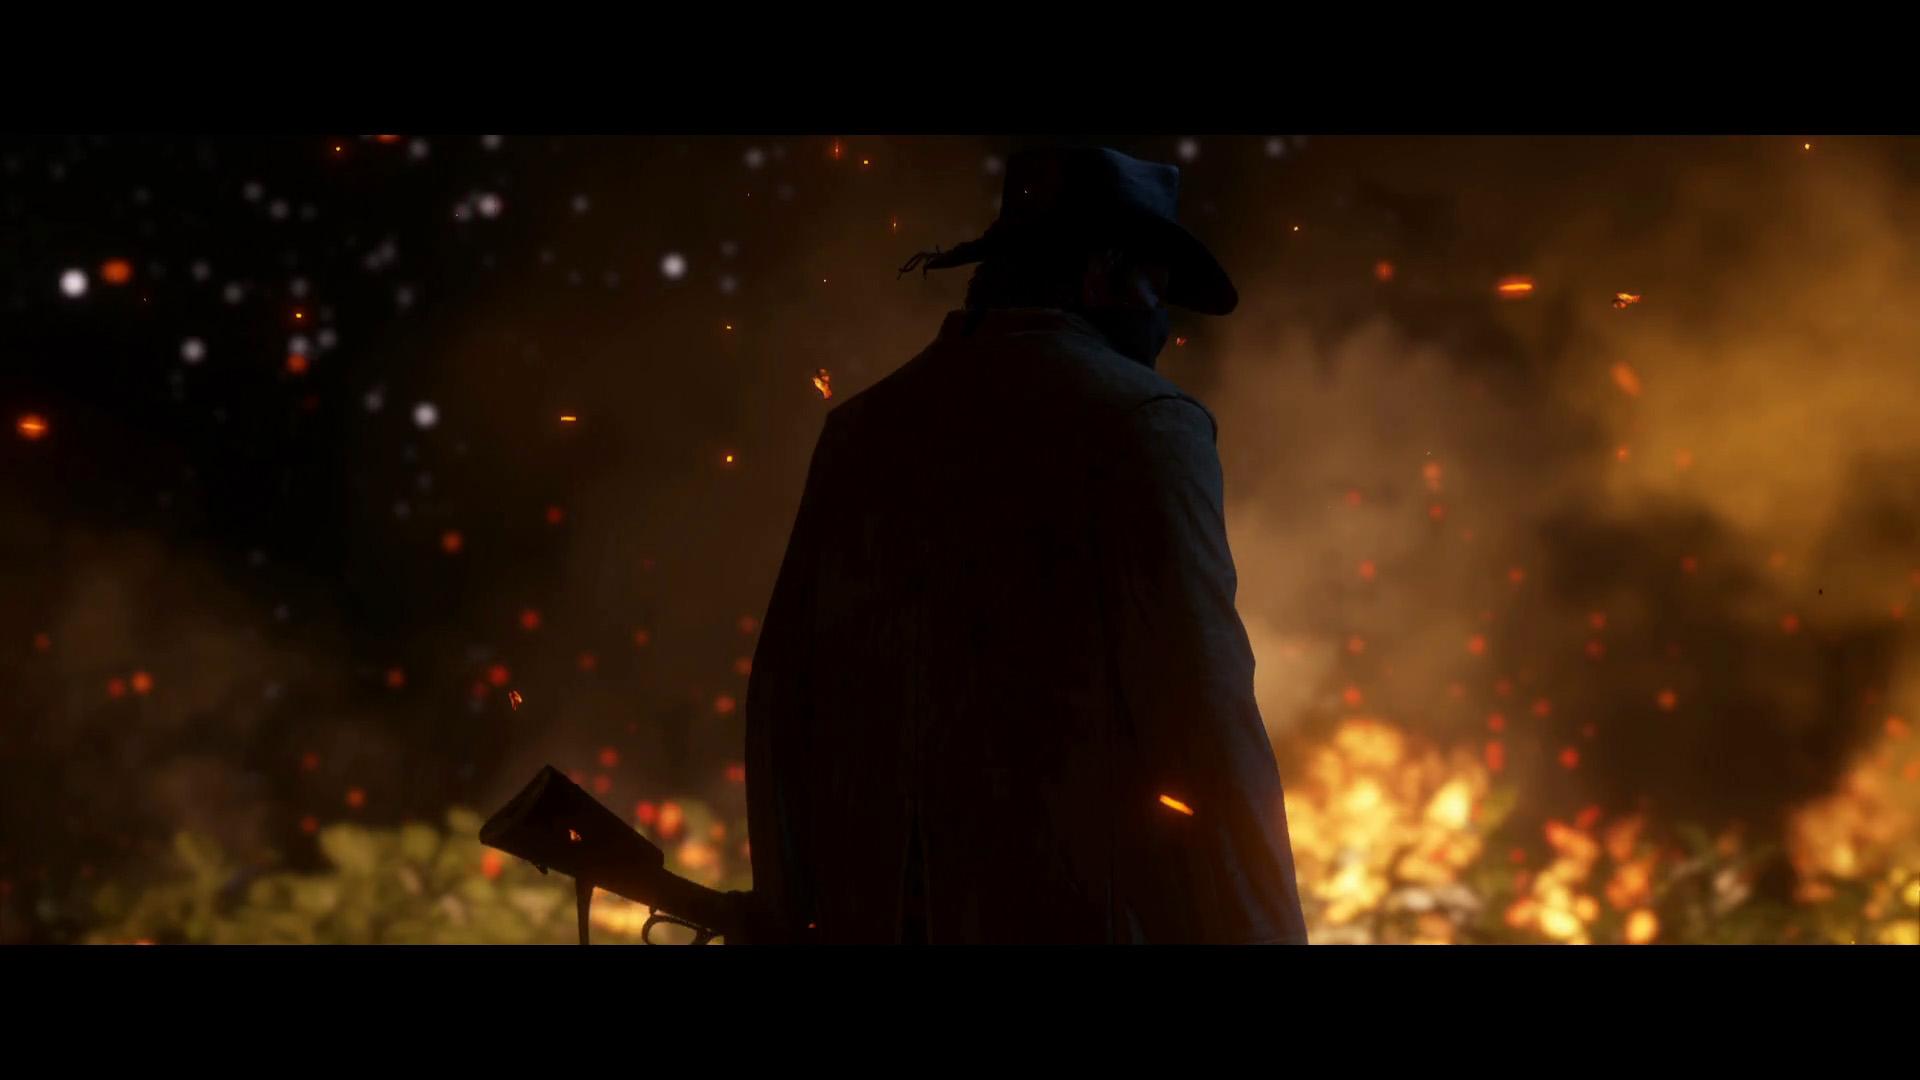 3440x1440p red dead redemption 2 backgrounds